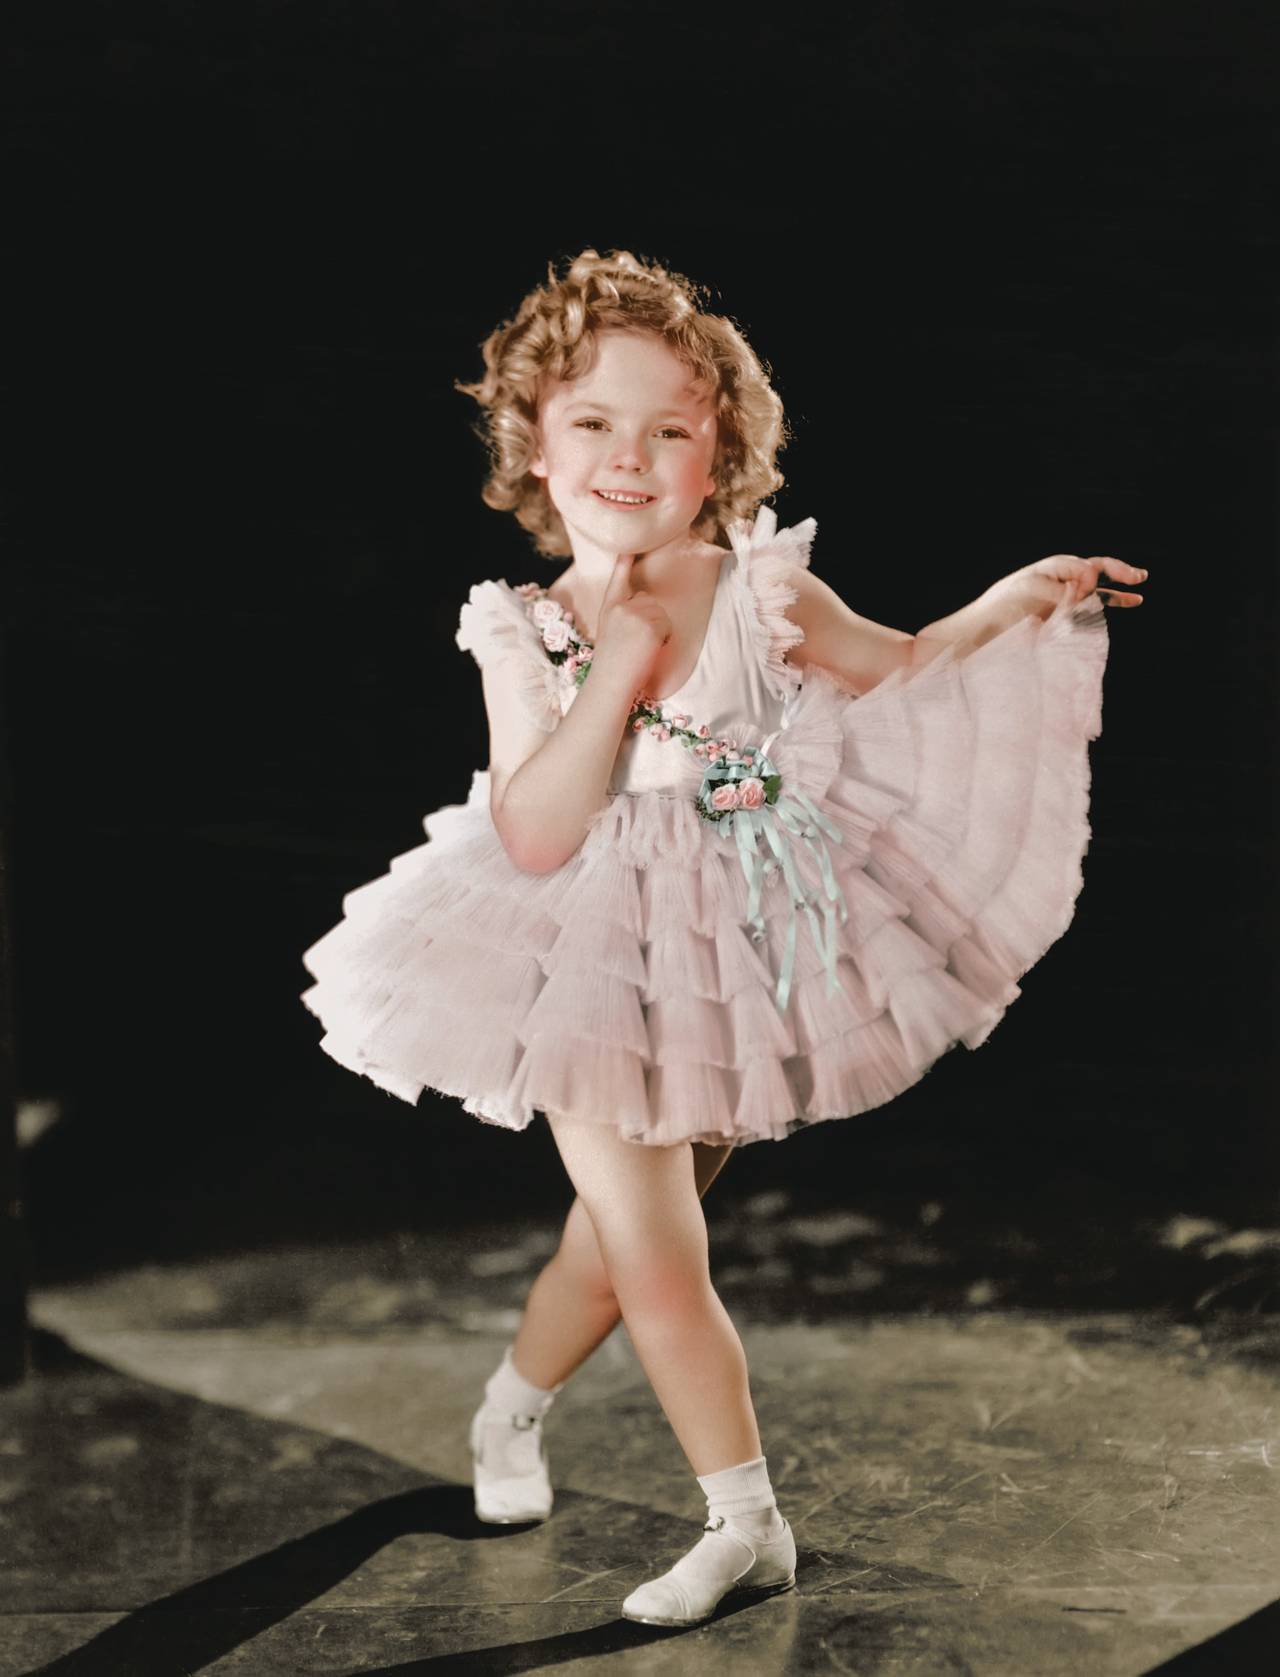 Unknown - Shirley Temple, Photograph: For Sale at 1stdibs